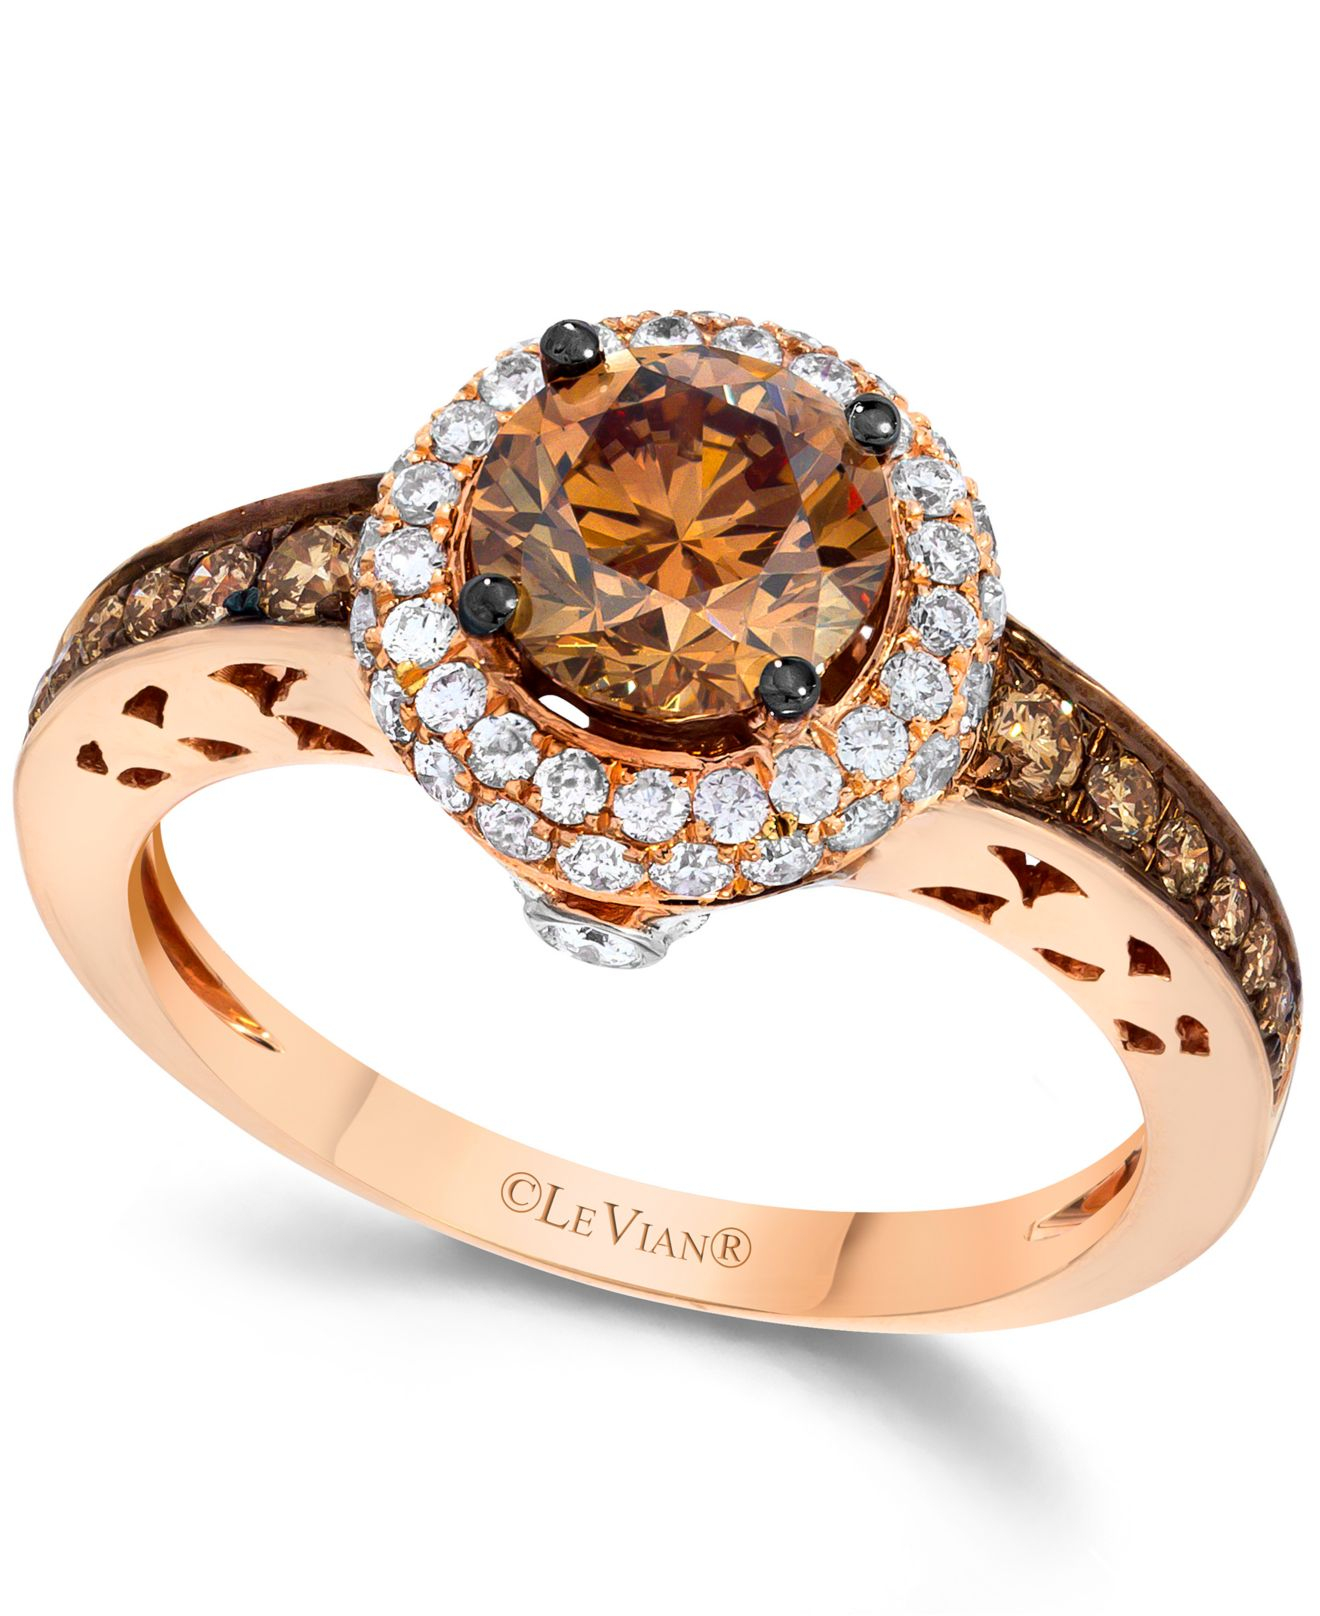 Le Vian Chocolate And White Diamond Engagement Ring In 14k Rose Gold (15/8 Ct. T.w.) in Brown